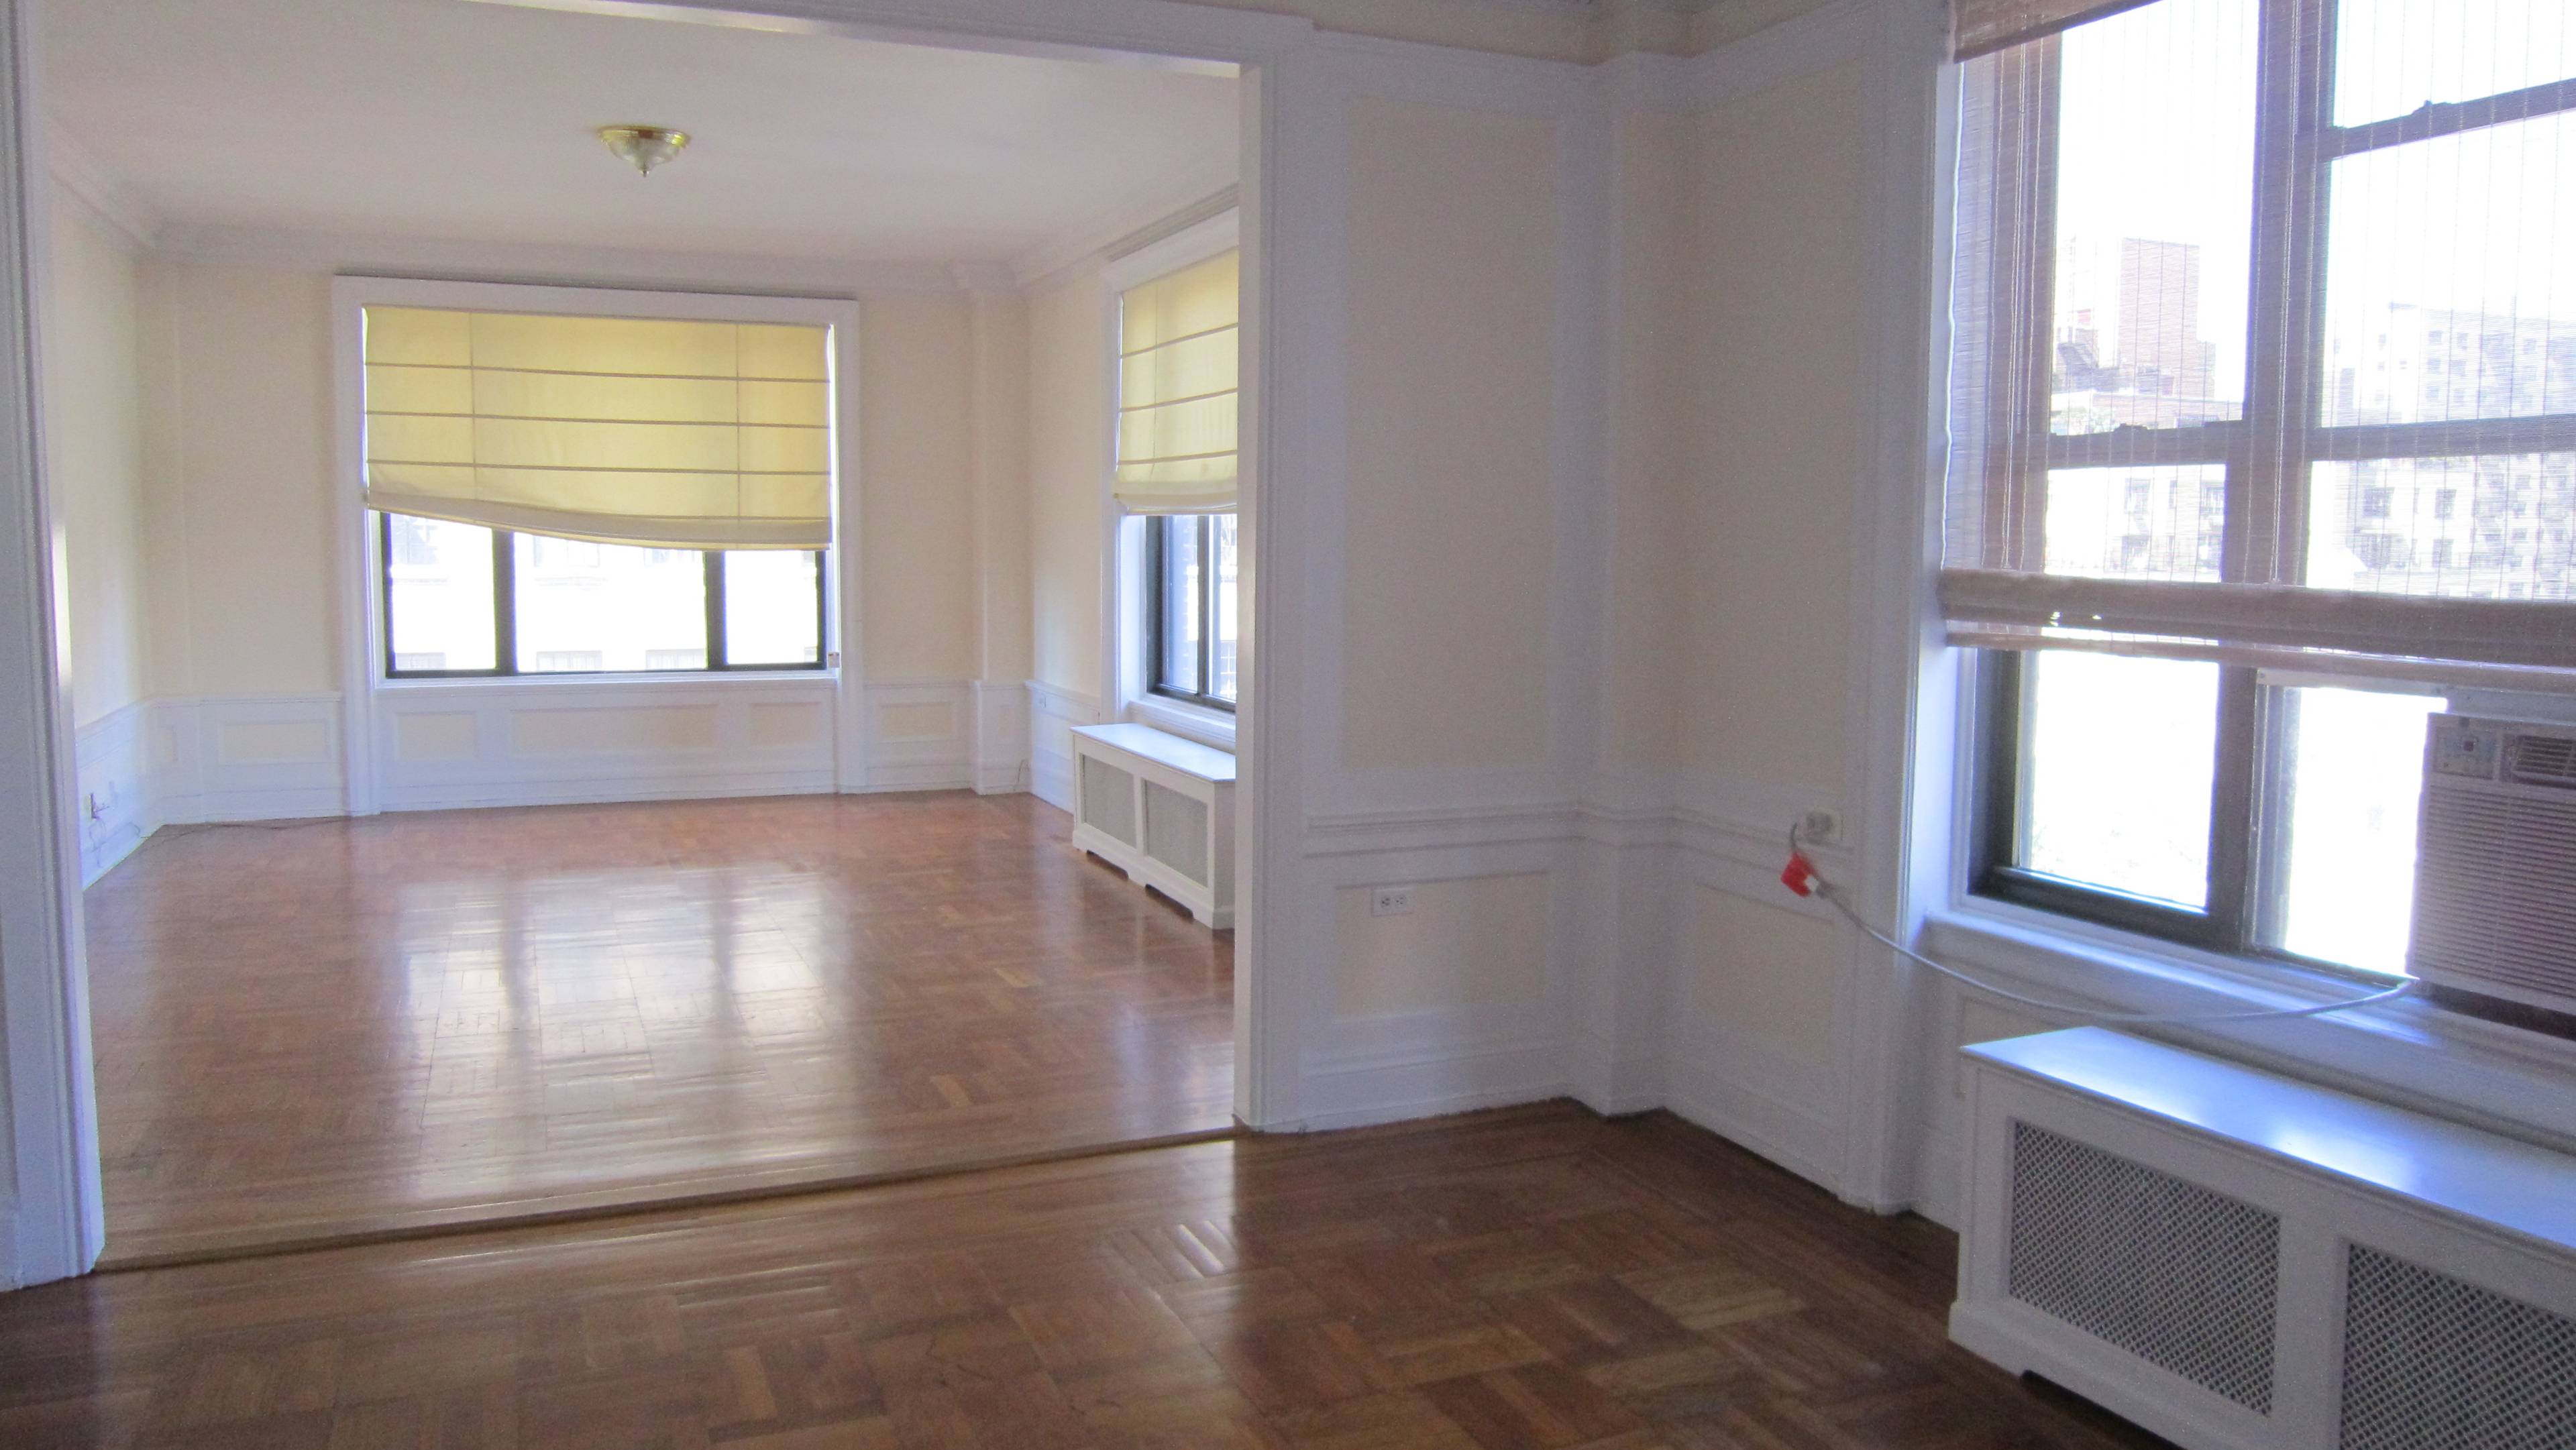 5 BR 3 BA Bright Residence Central Park Spacious Living Room W/D Ample Closets Upper West SIde Best location